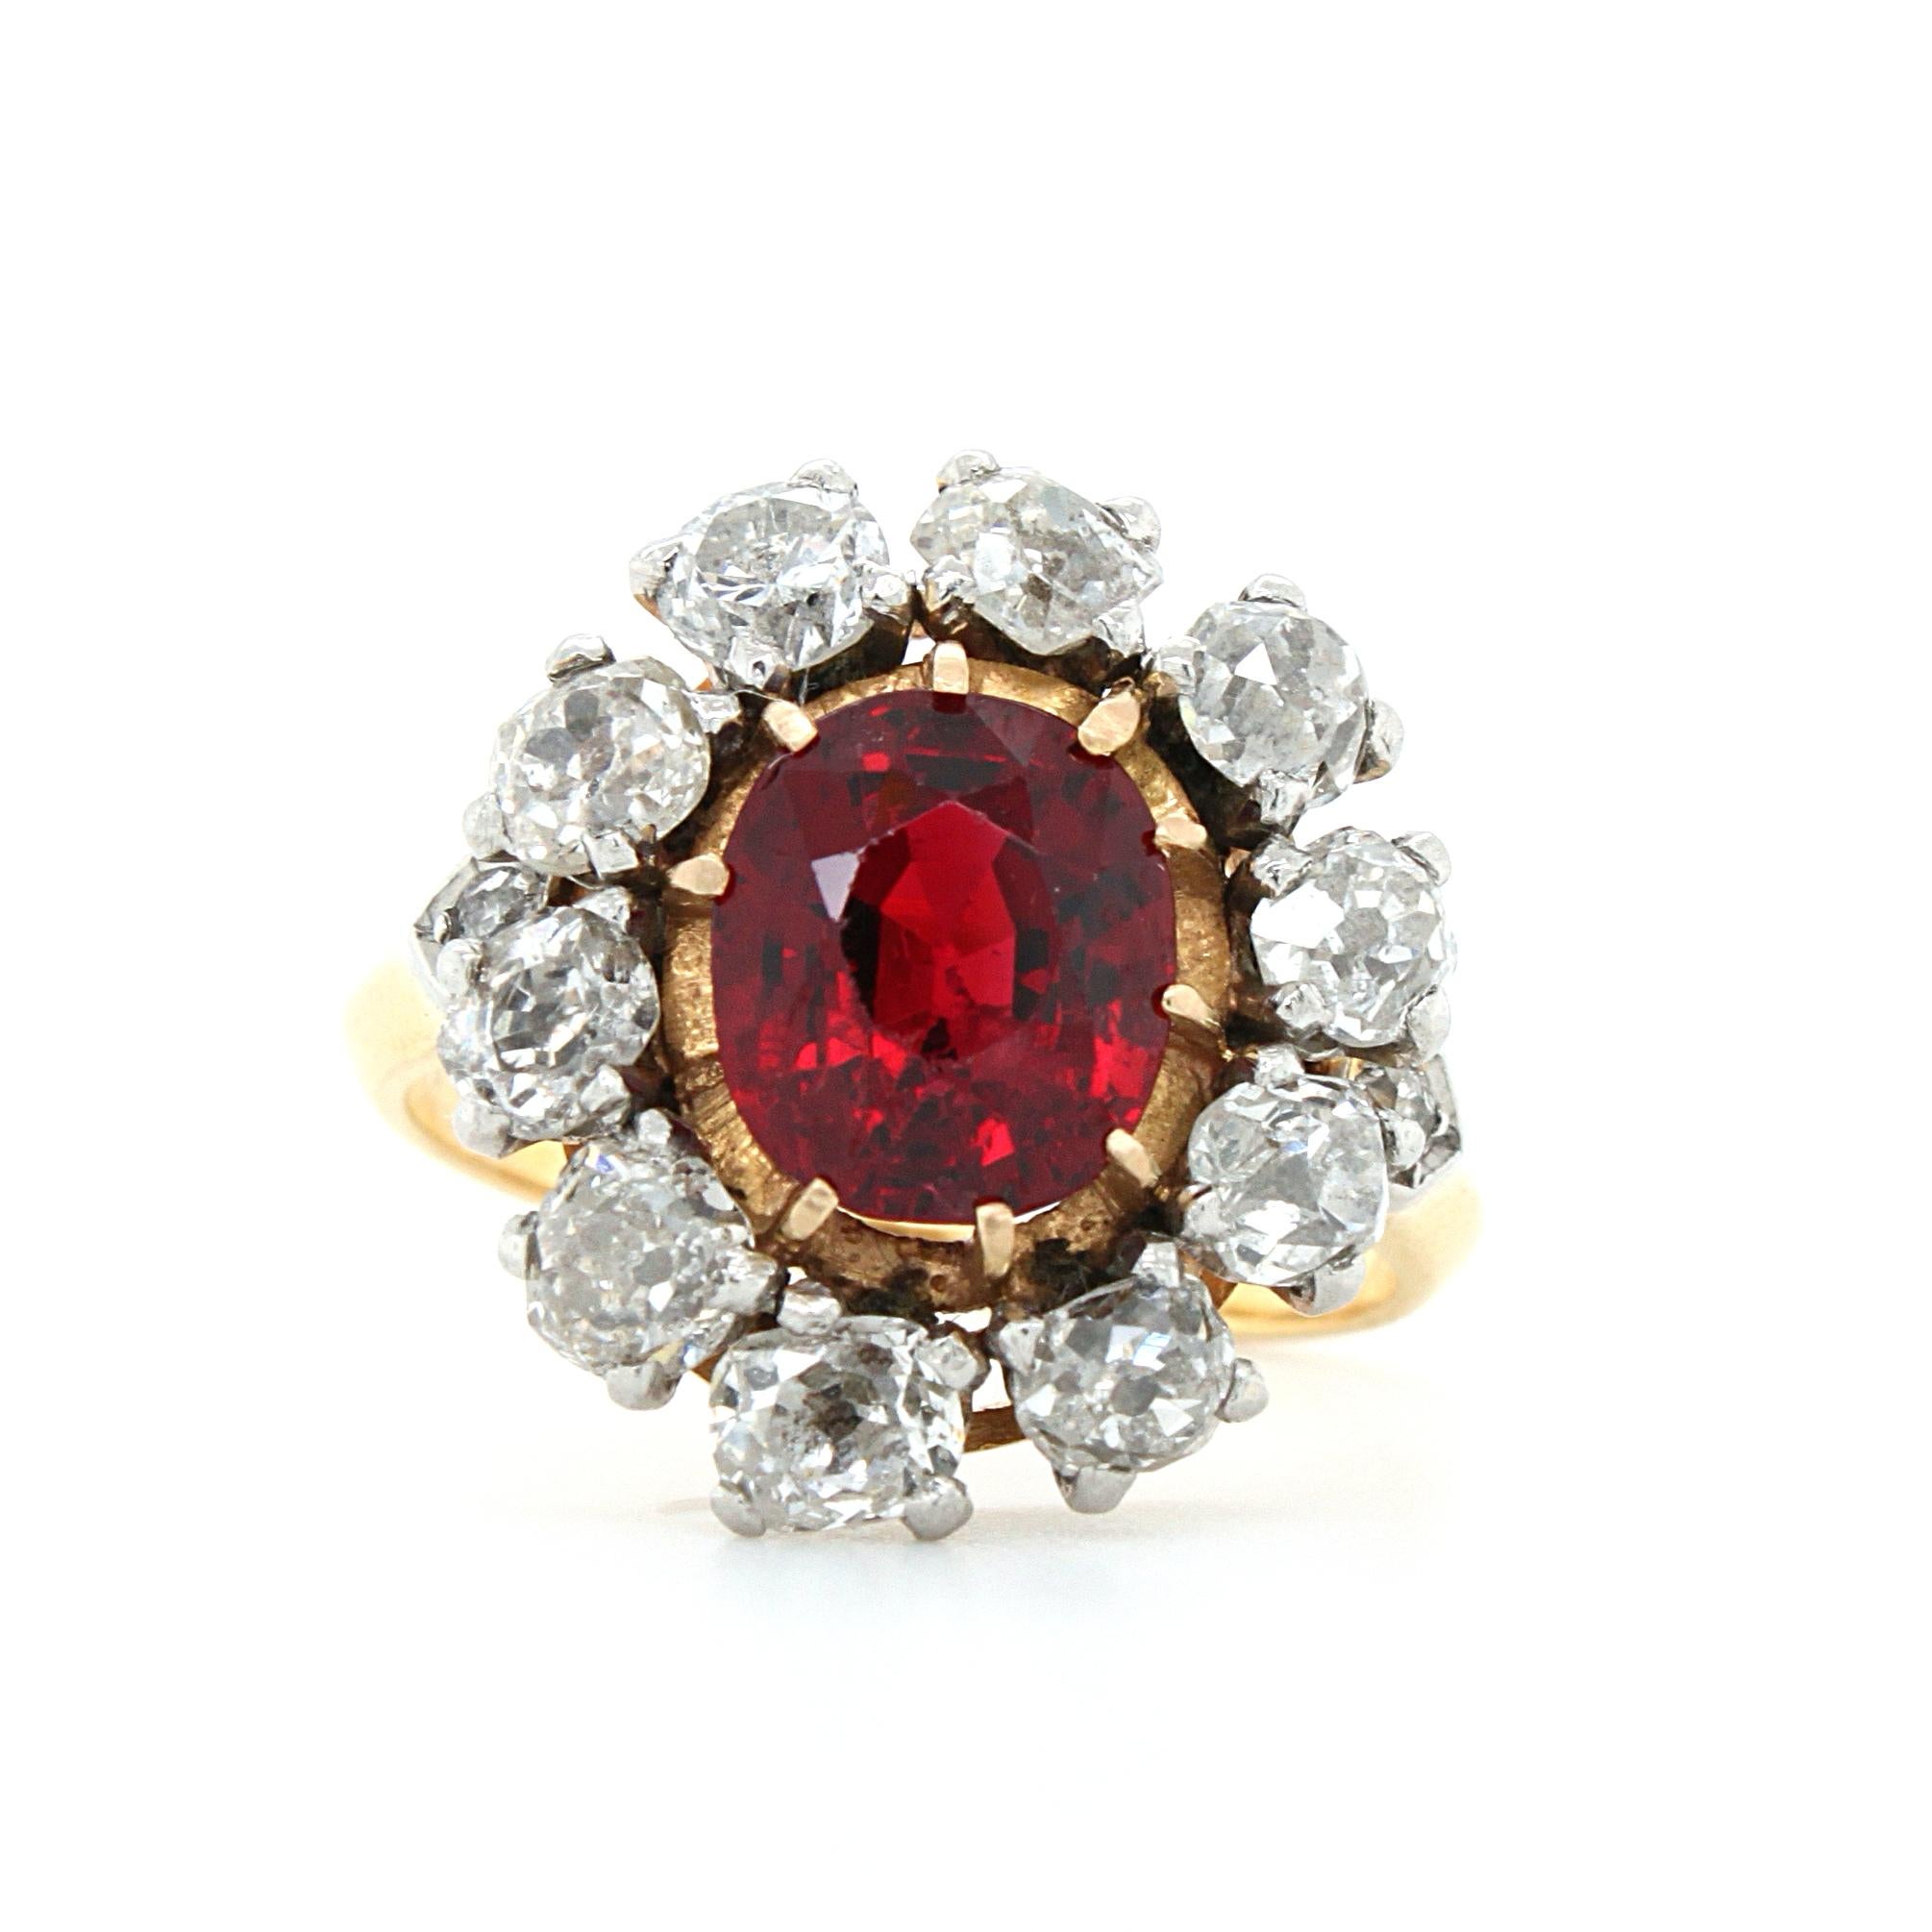 A fine antique red spinel and diamond ring in 18k yellow gold, early Victorian, ca. 1860s. The centre gemstone is an antique cushion cut spinel - not heated - accompanied by a gemological report. The spinel weighs 2.41 carats and has a vivid red